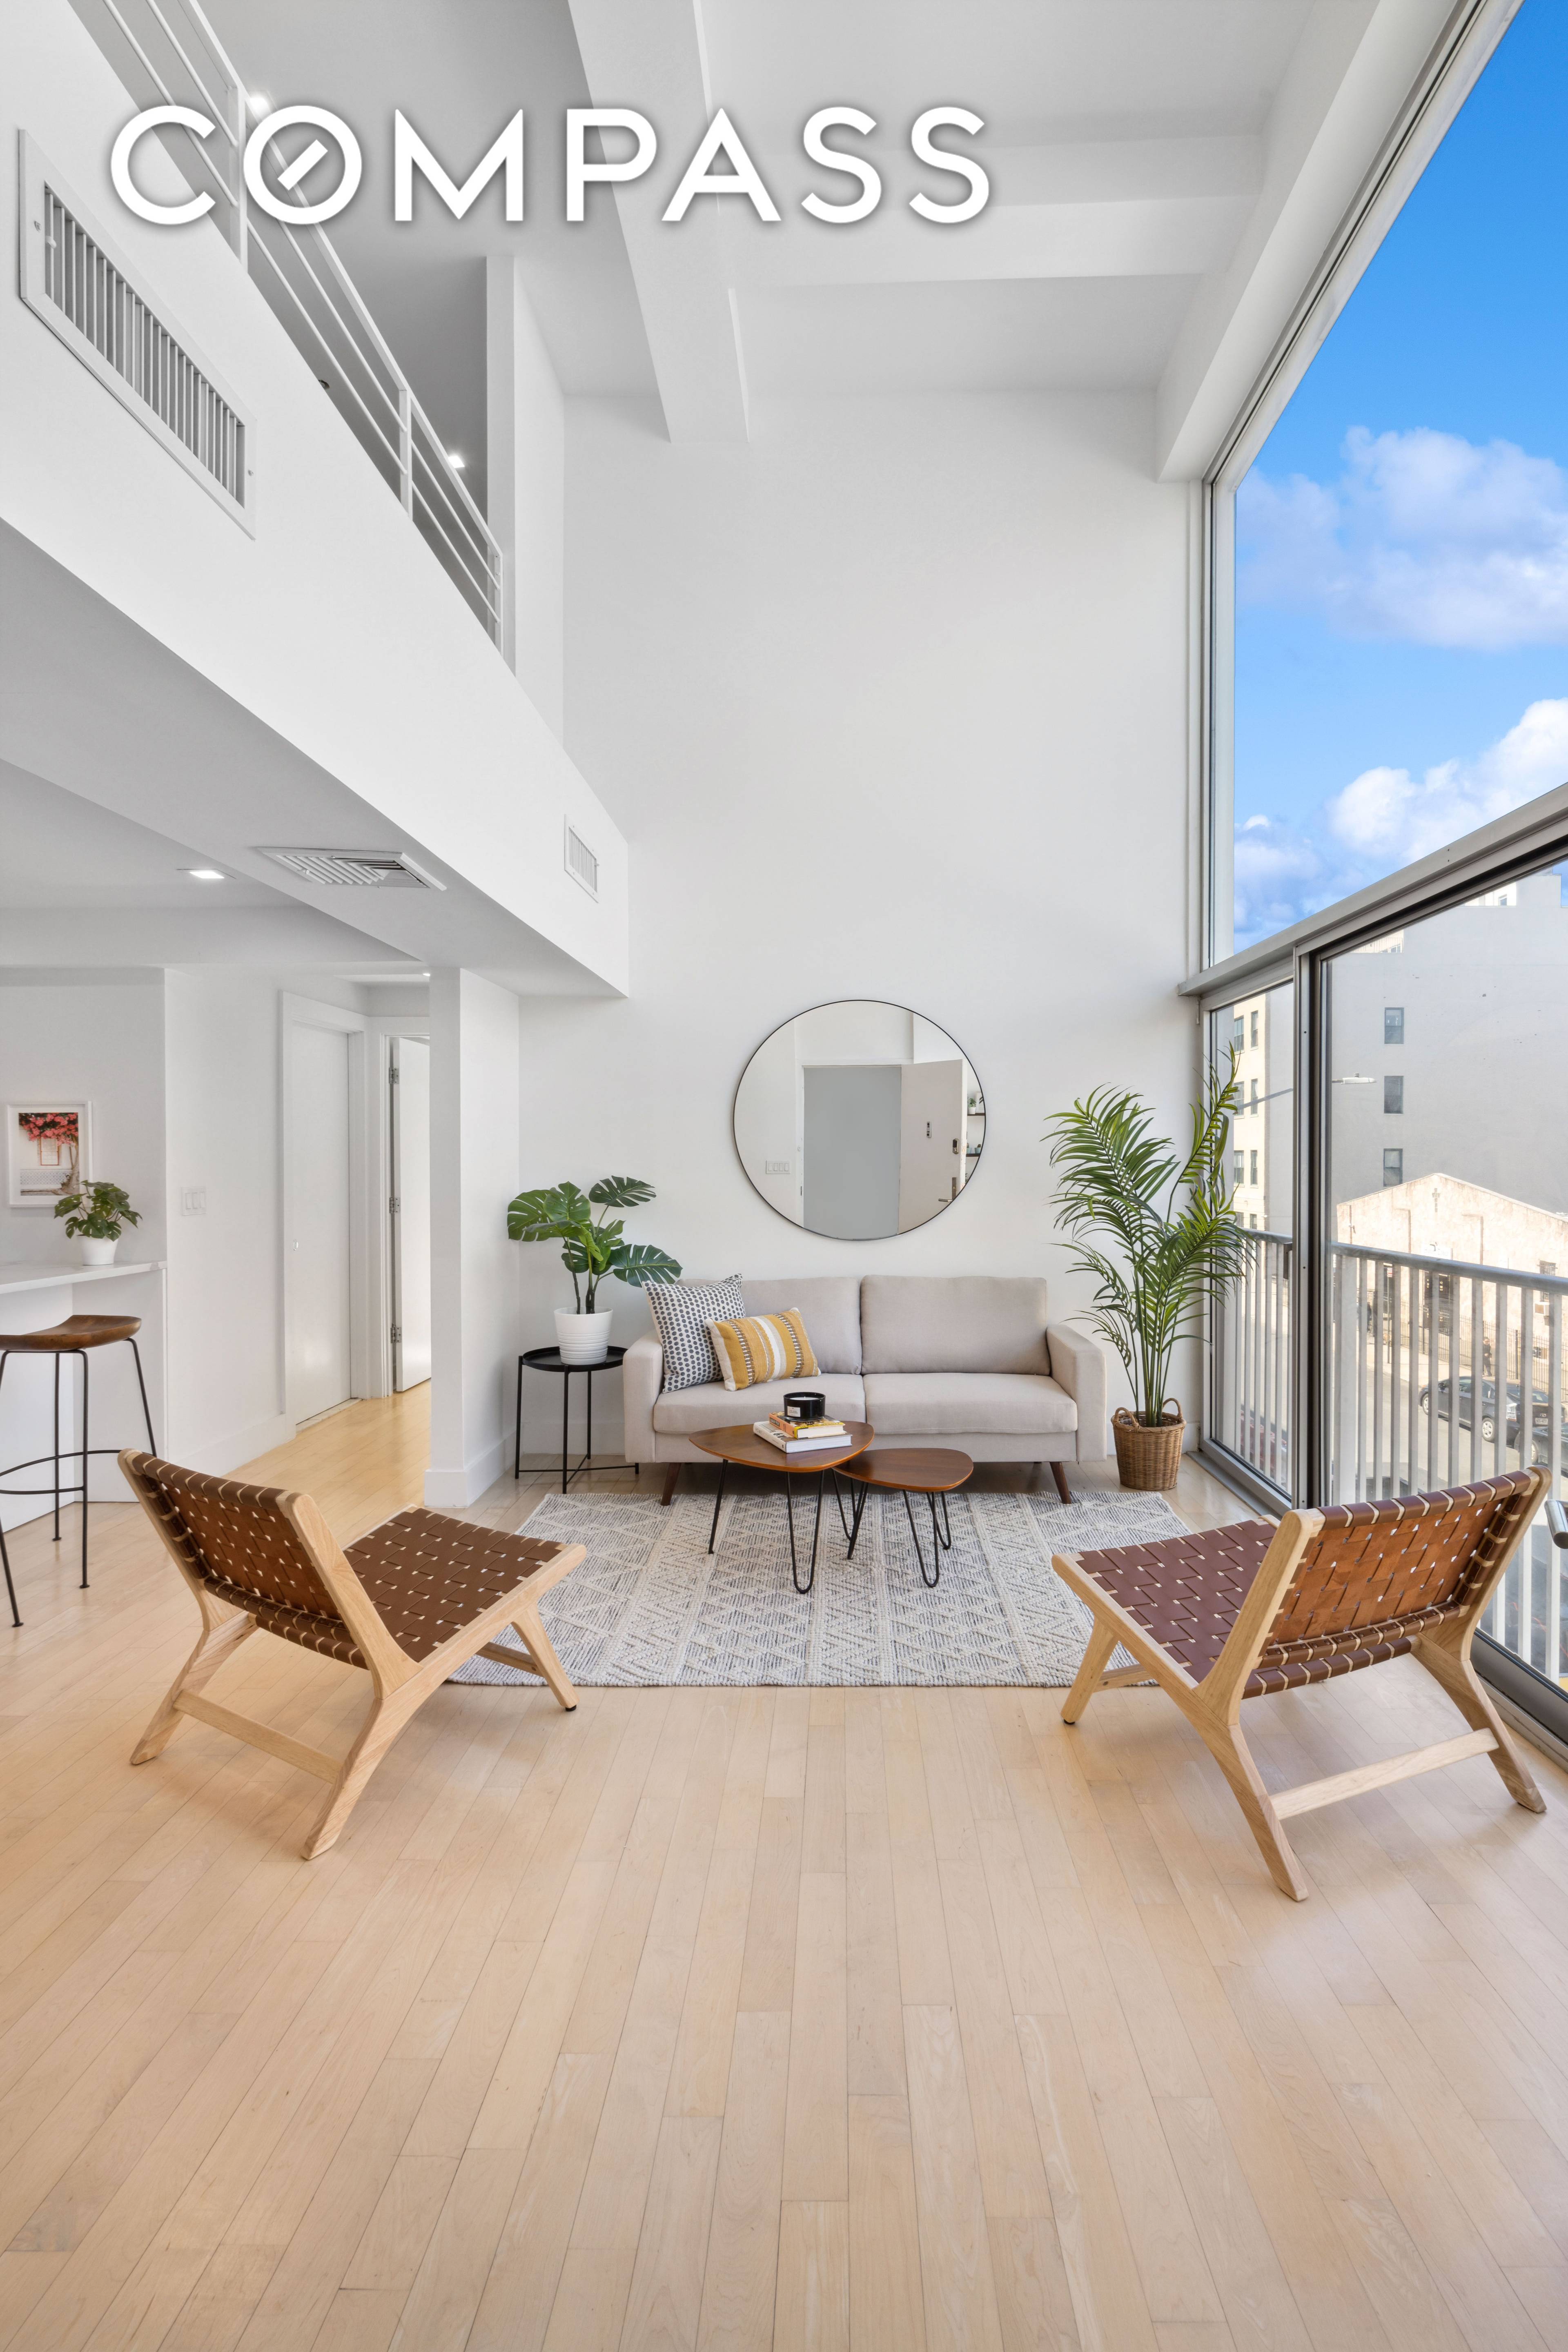 Soaring double height ceilings, dramatic floor to ceiling windows, central HVAC, and private outdoor space are just some of the coveted features that define this modern, loft like home.